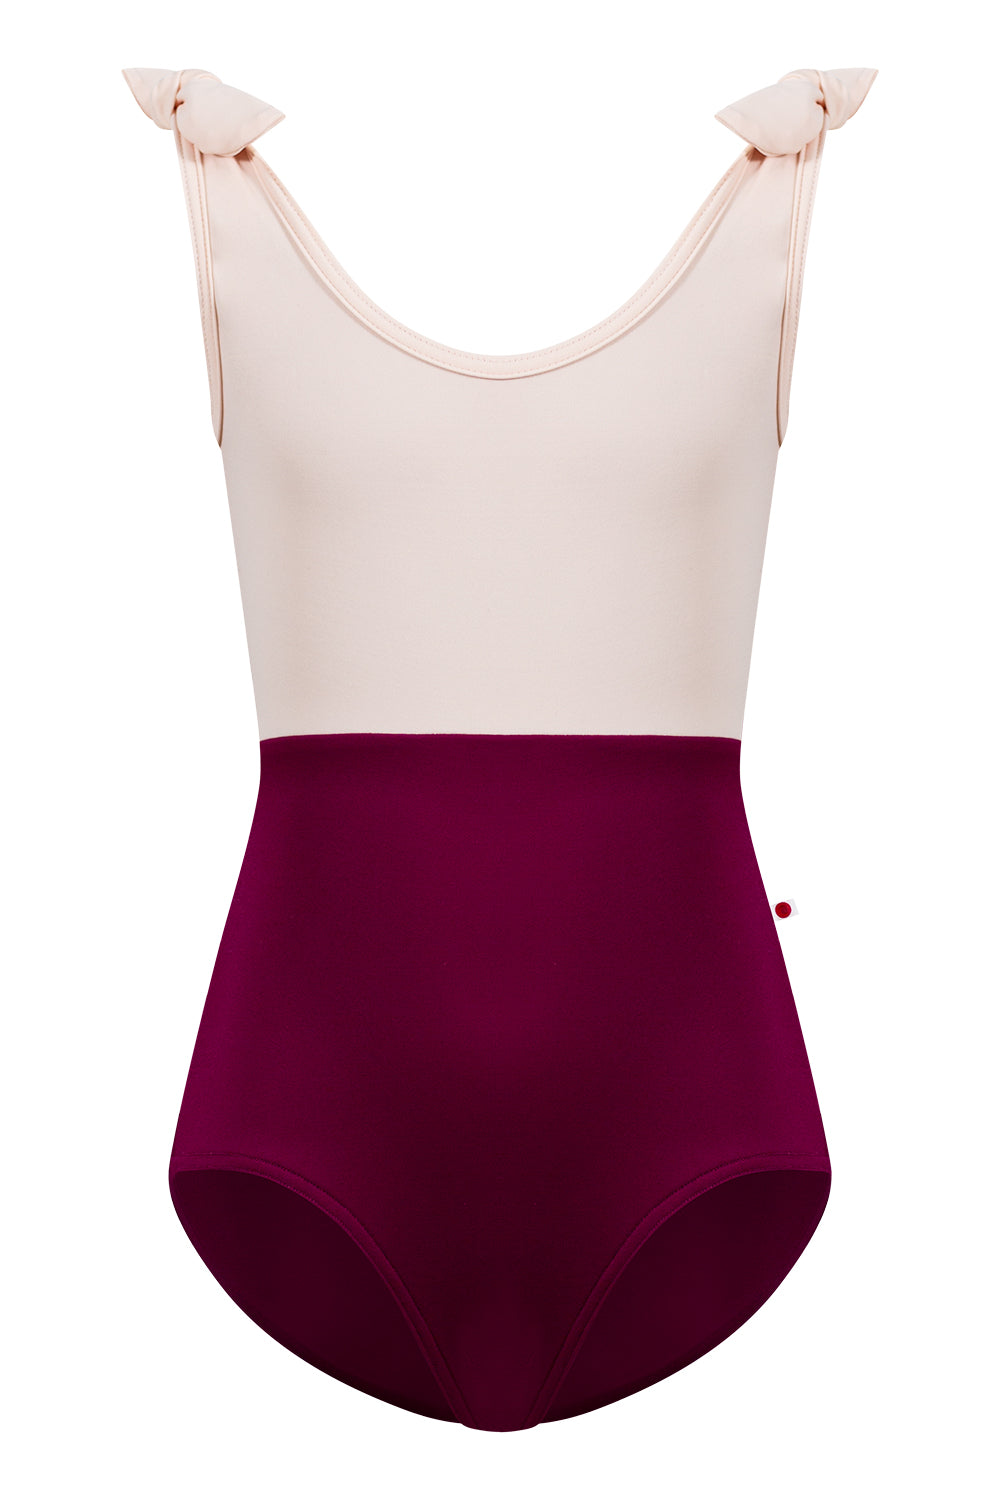 Kids Anna Duo leotard in T-Maroon body color with T-Misty Rose top & trim color and matching shoulder bows